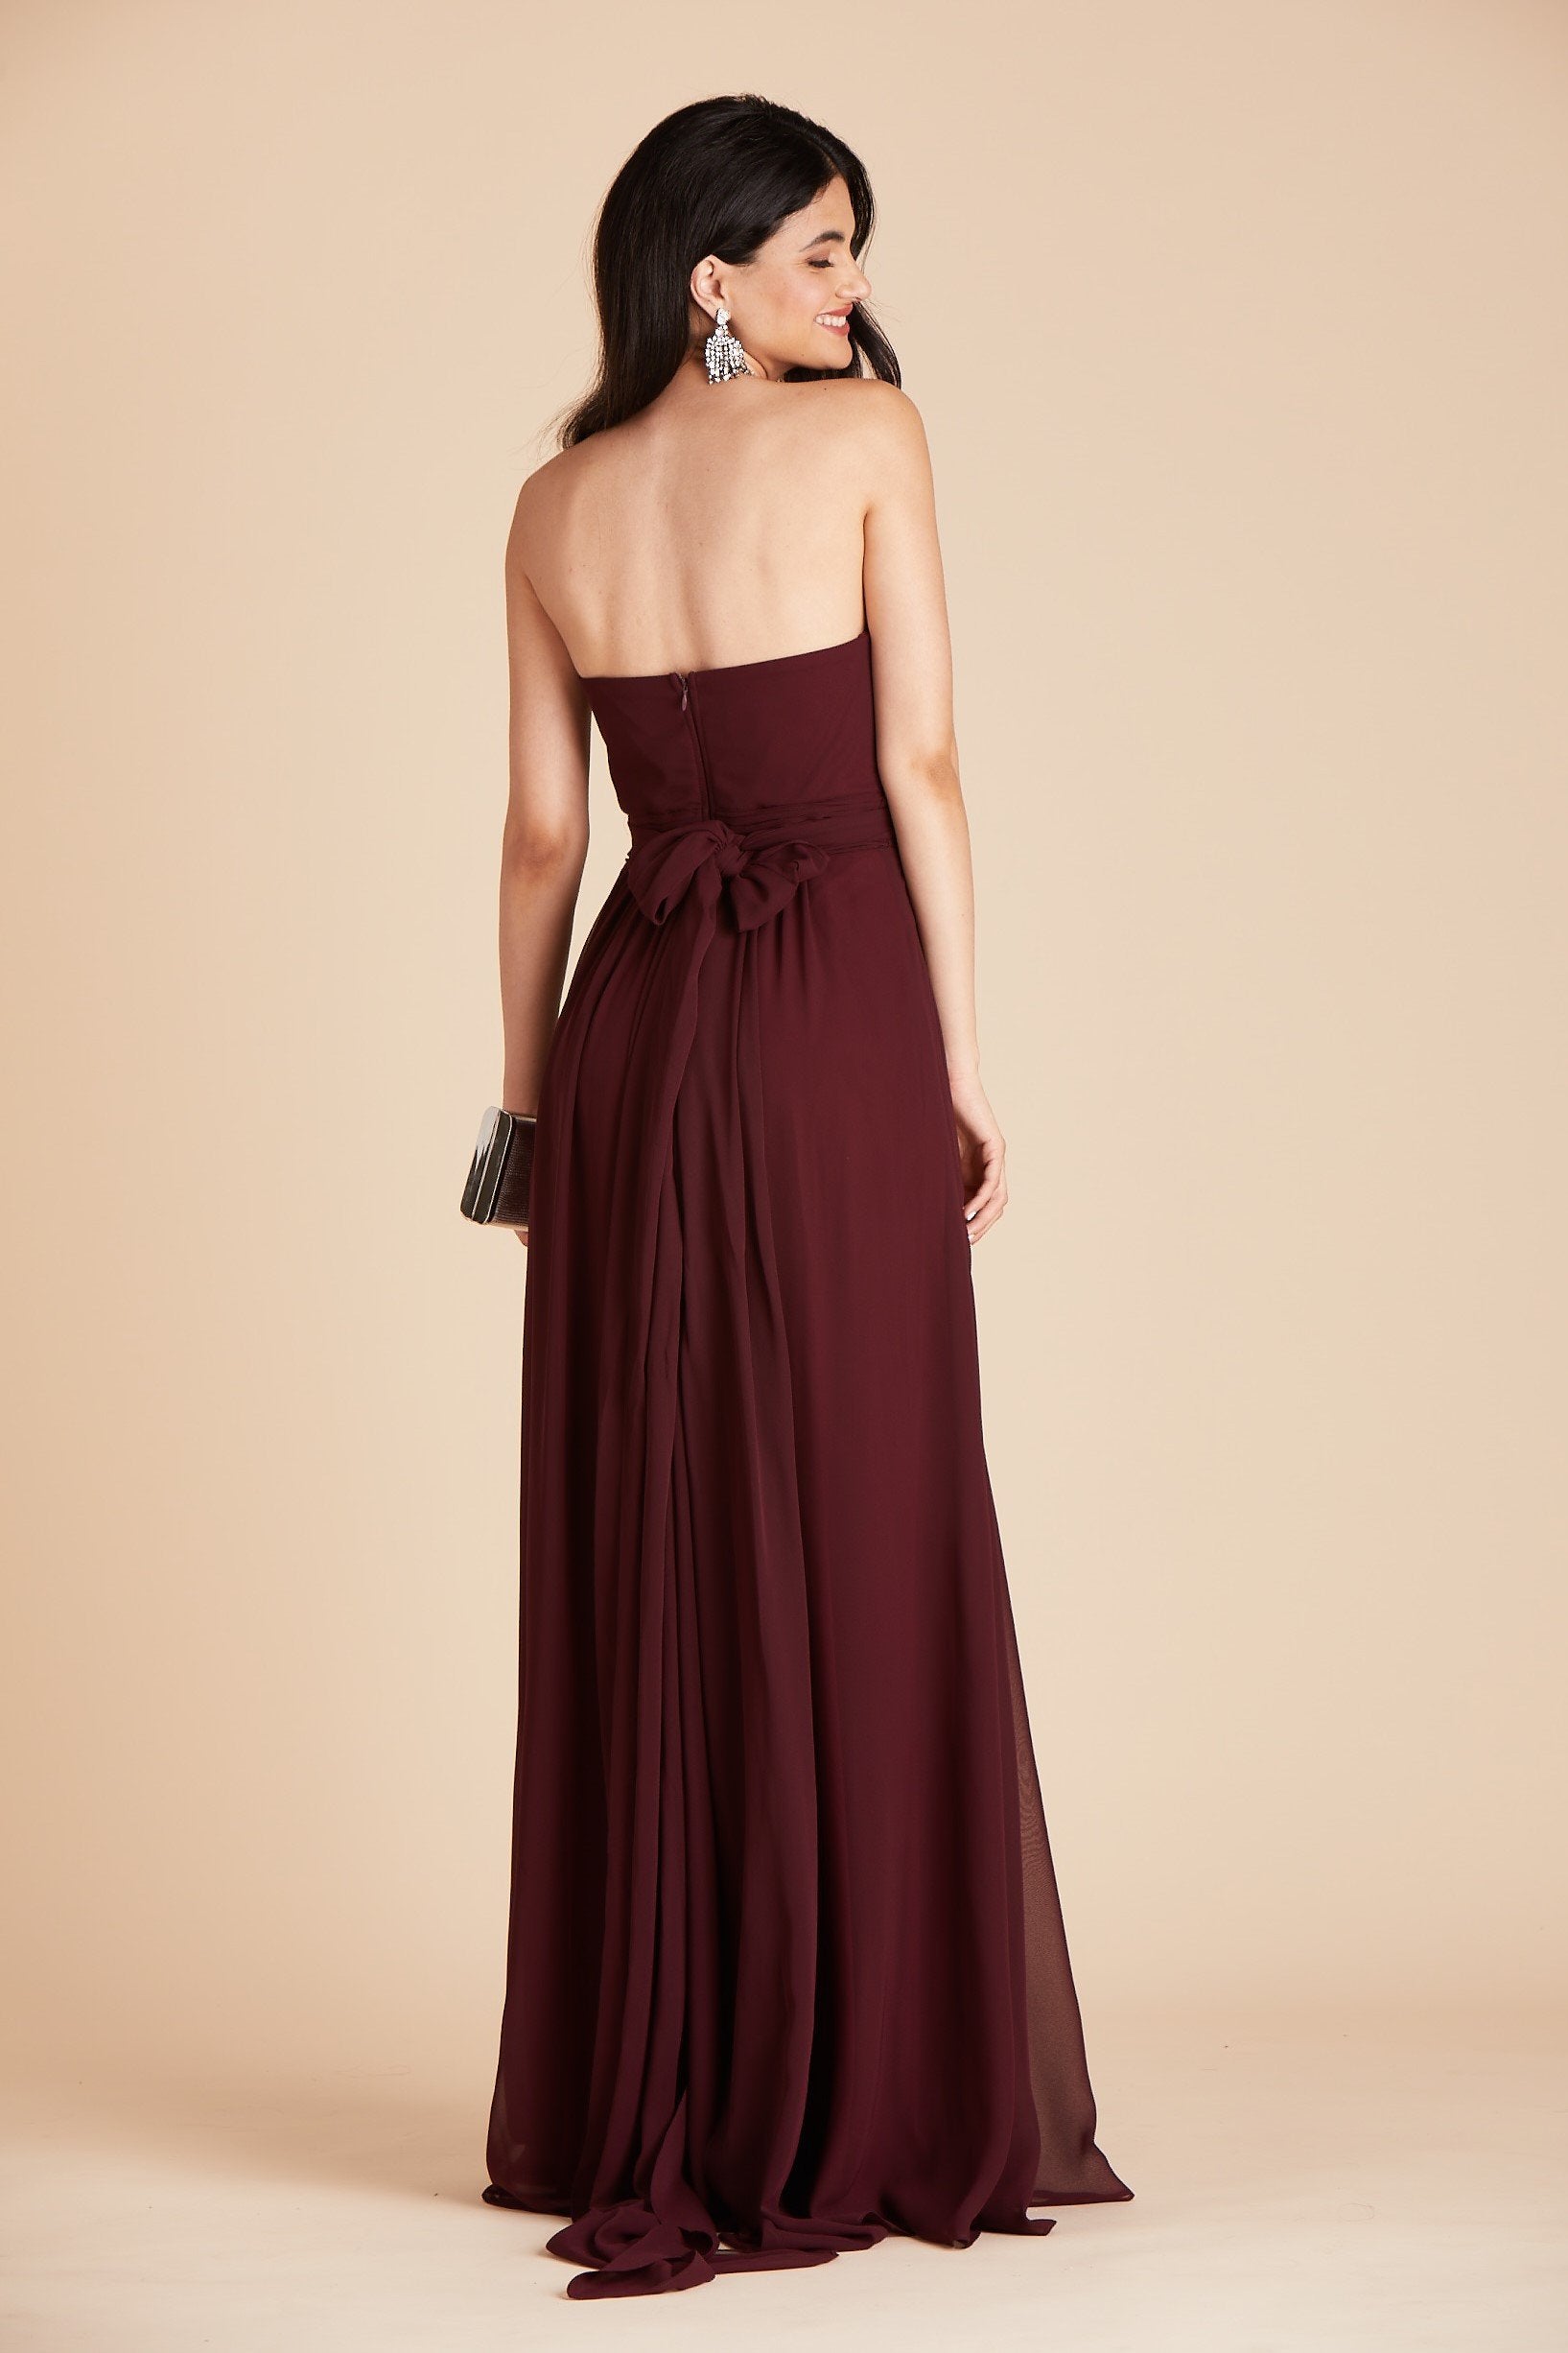 Grace convertible bridesmaid dress in cabernet burgundy chiffon by Birdy Grey, back view